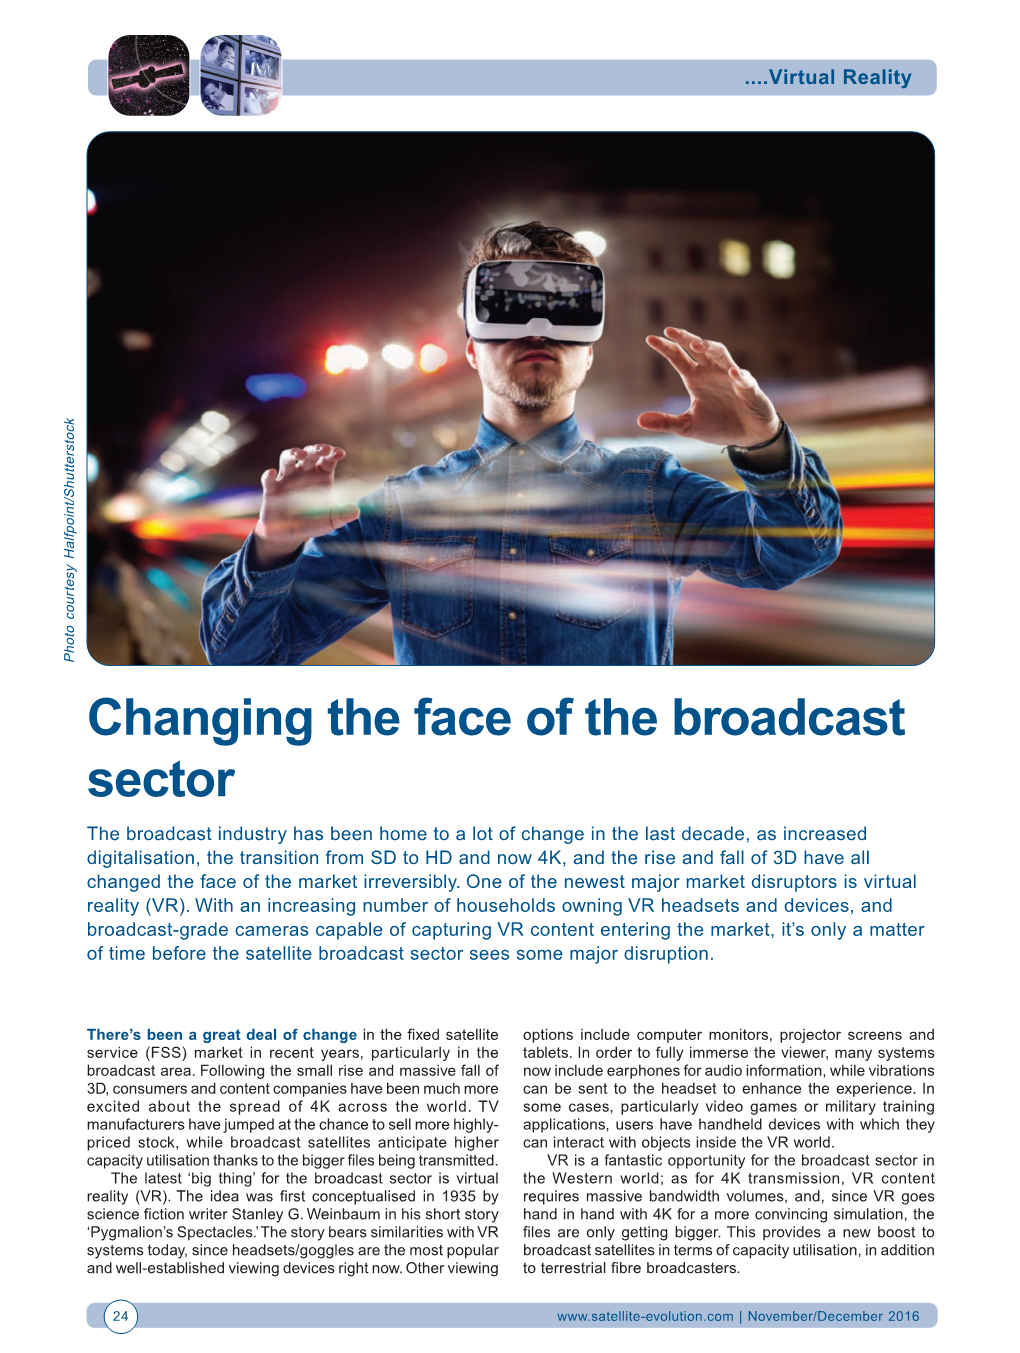 Changing the Face of the Broadcast Sector